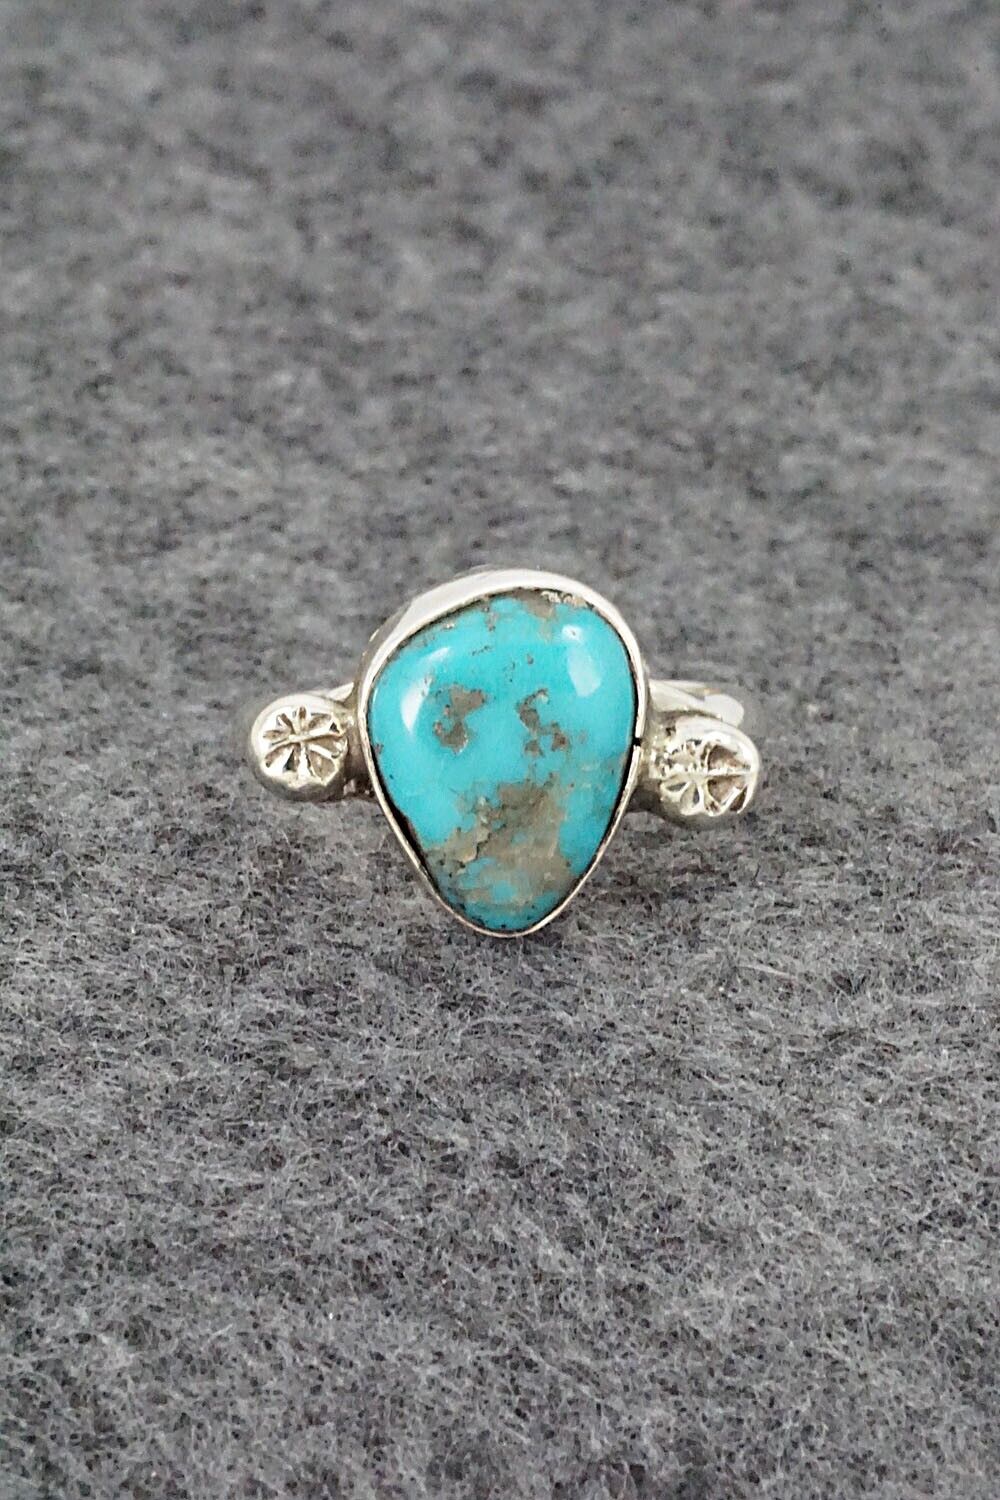 Turquoise & Sterling Silver Ring - Priscilla Reeder - Size 7.5